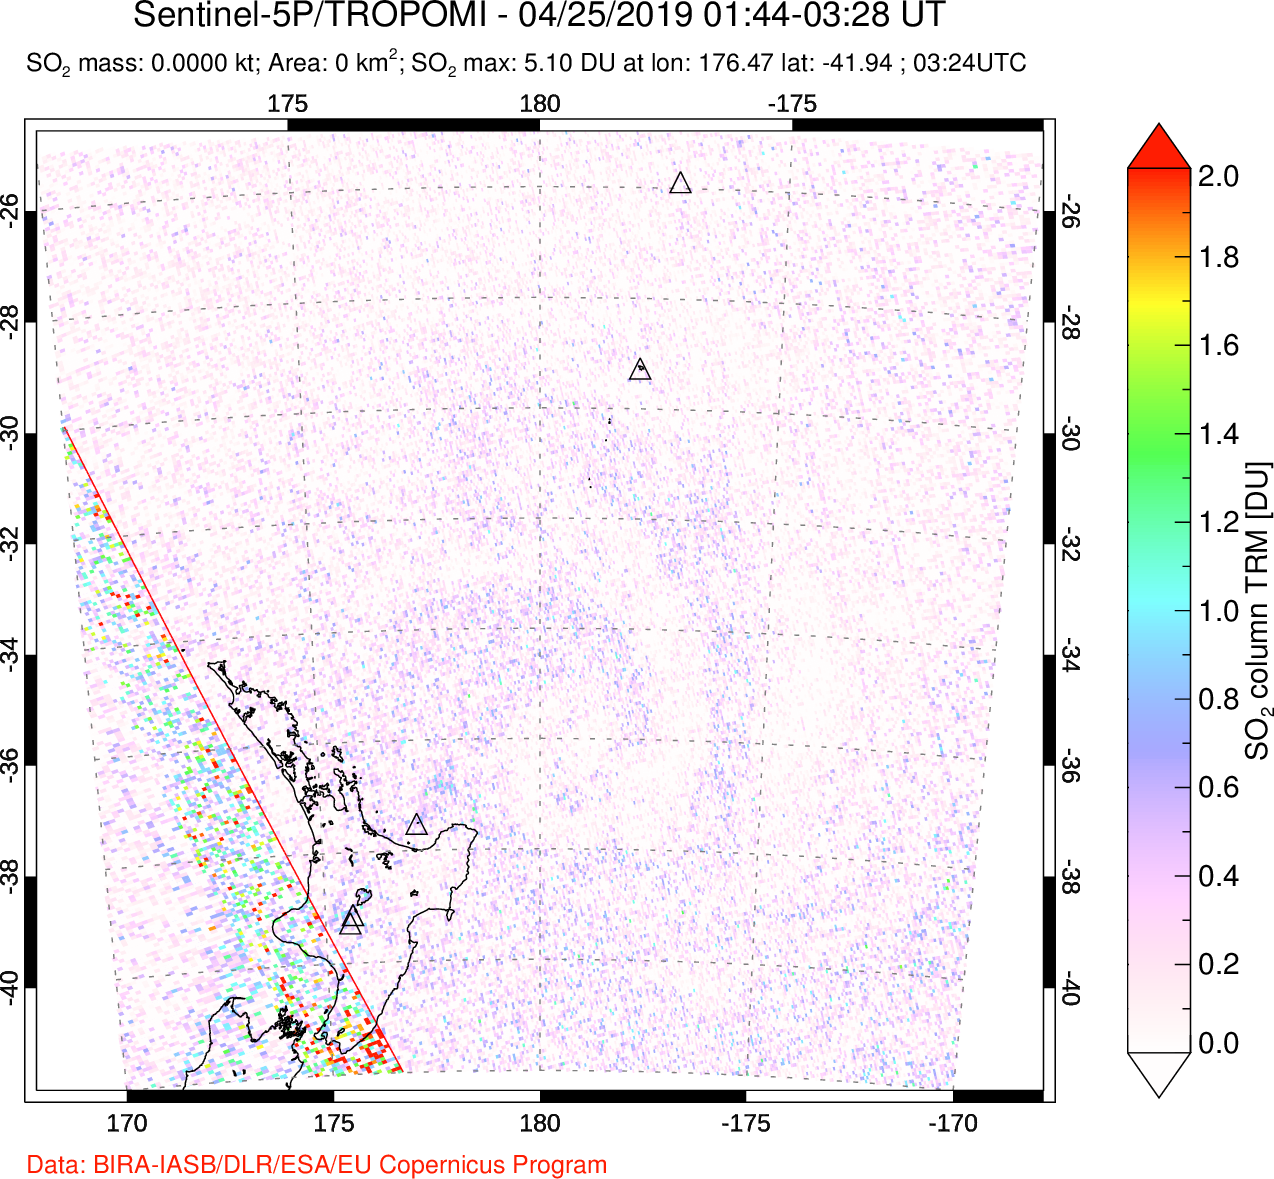 A sulfur dioxide image over New Zealand on Apr 25, 2019.